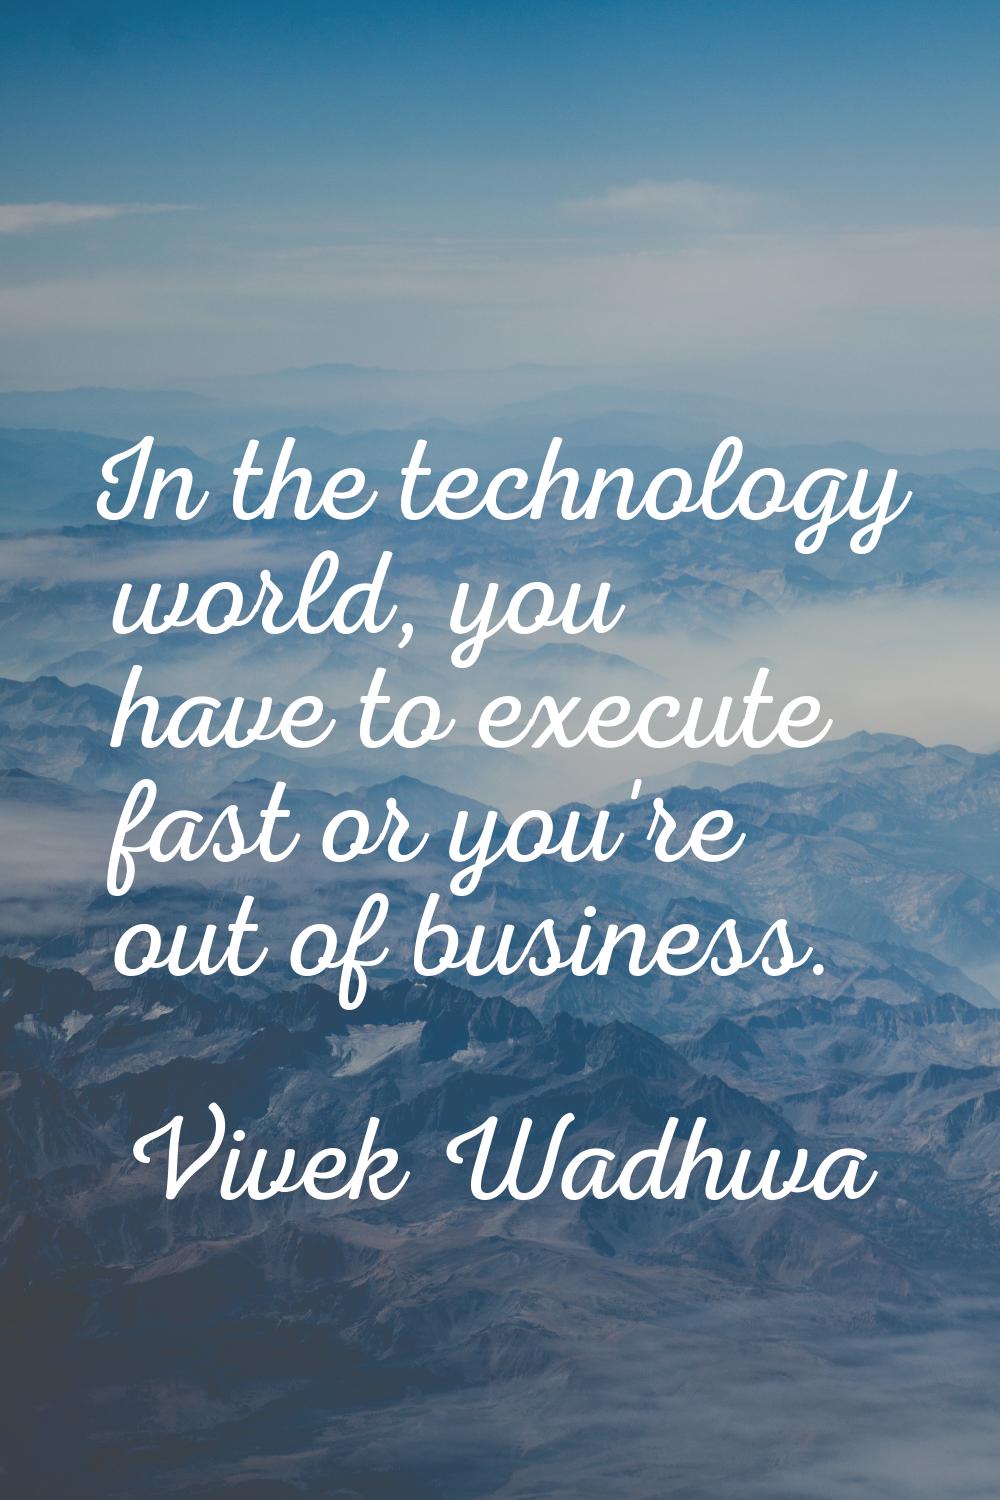 In the technology world, you have to execute fast or you're out of business.